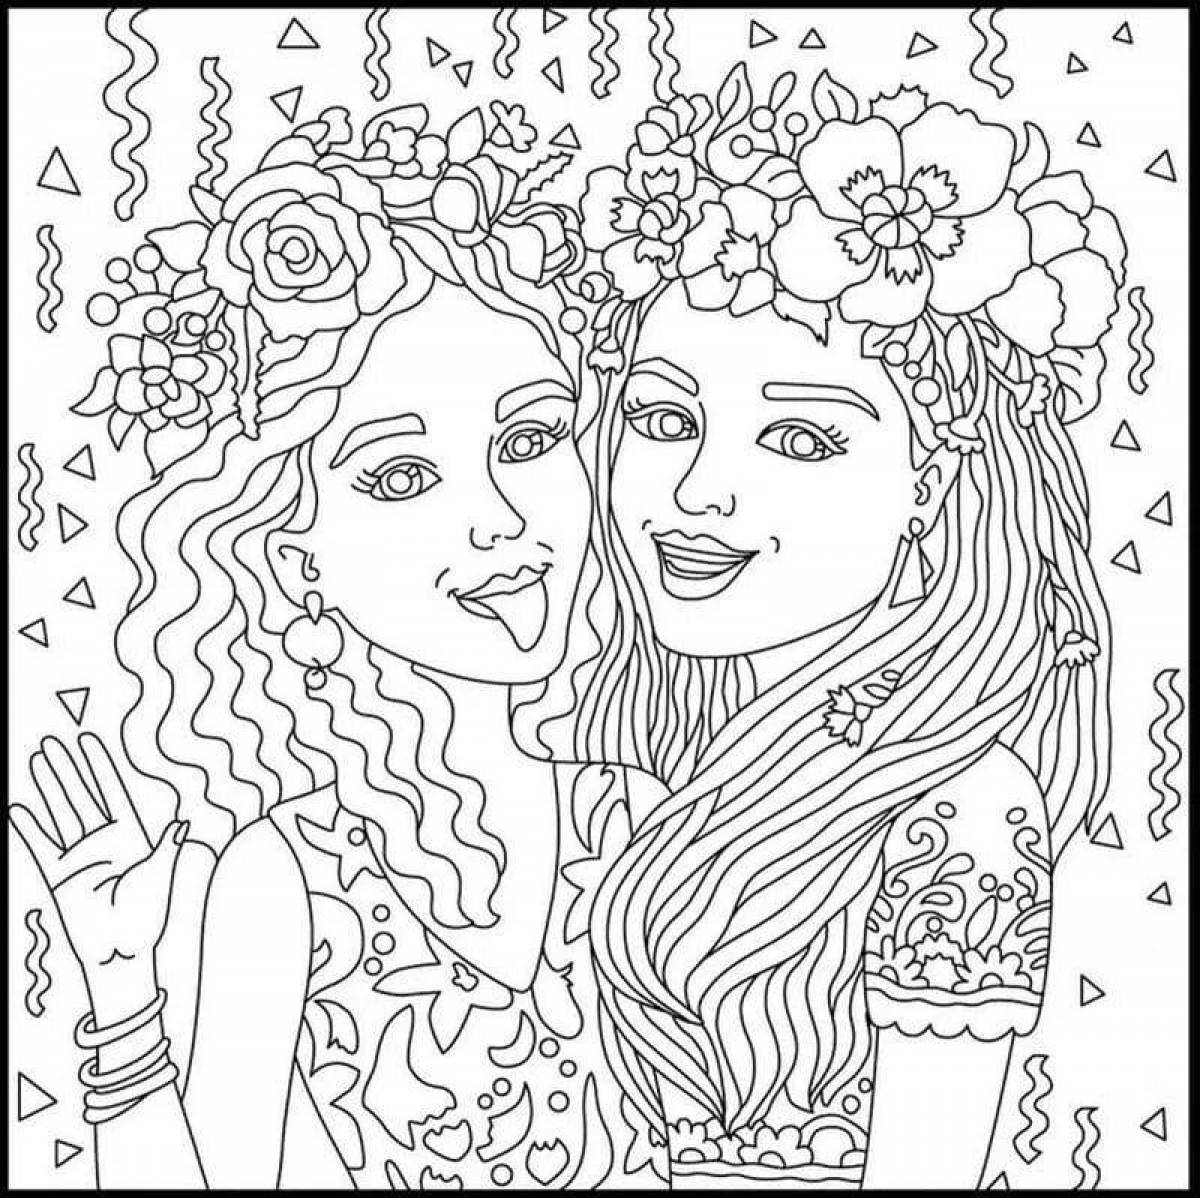 Colorful 13 year old modern coloring book